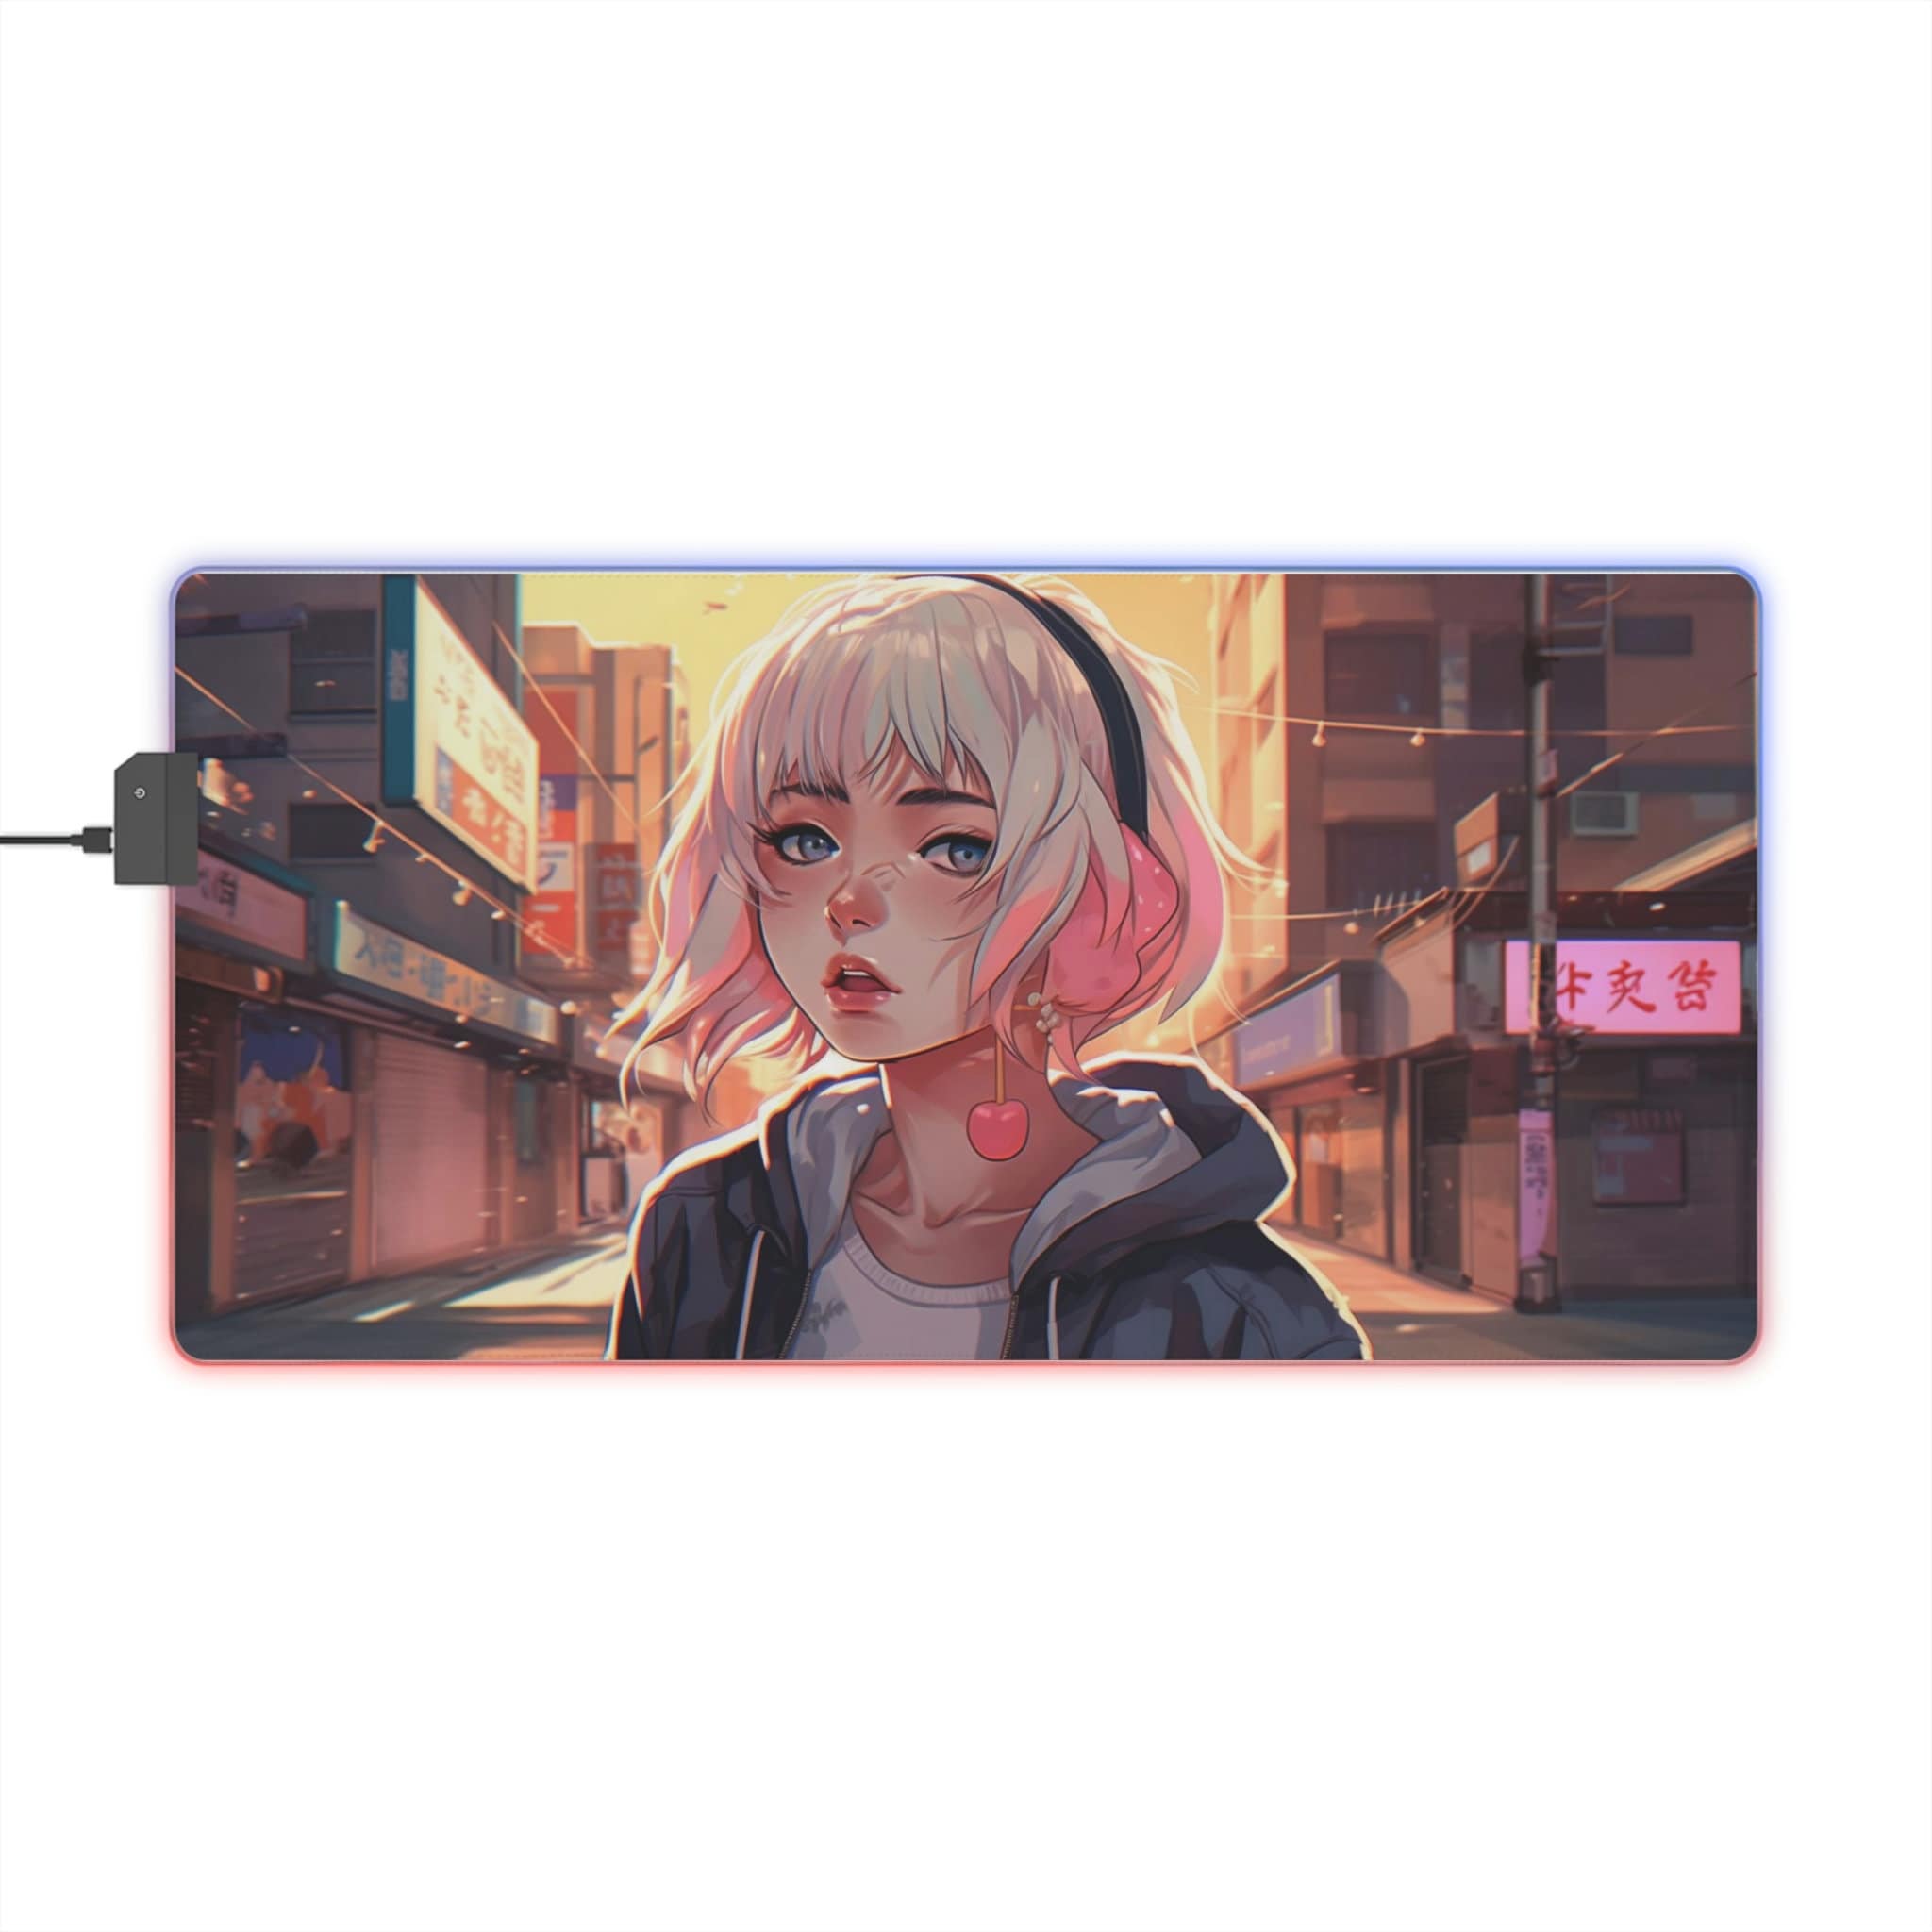 Amazoncom  3D AnimeMouse Pad Wrist Support Cartoon Silica Gel Mousepad  Wrist Cushion Pad Nonslip Mouse Pad Pain Relief 2Way SkinShoto Todoroki  PXYWSWD  Office Products